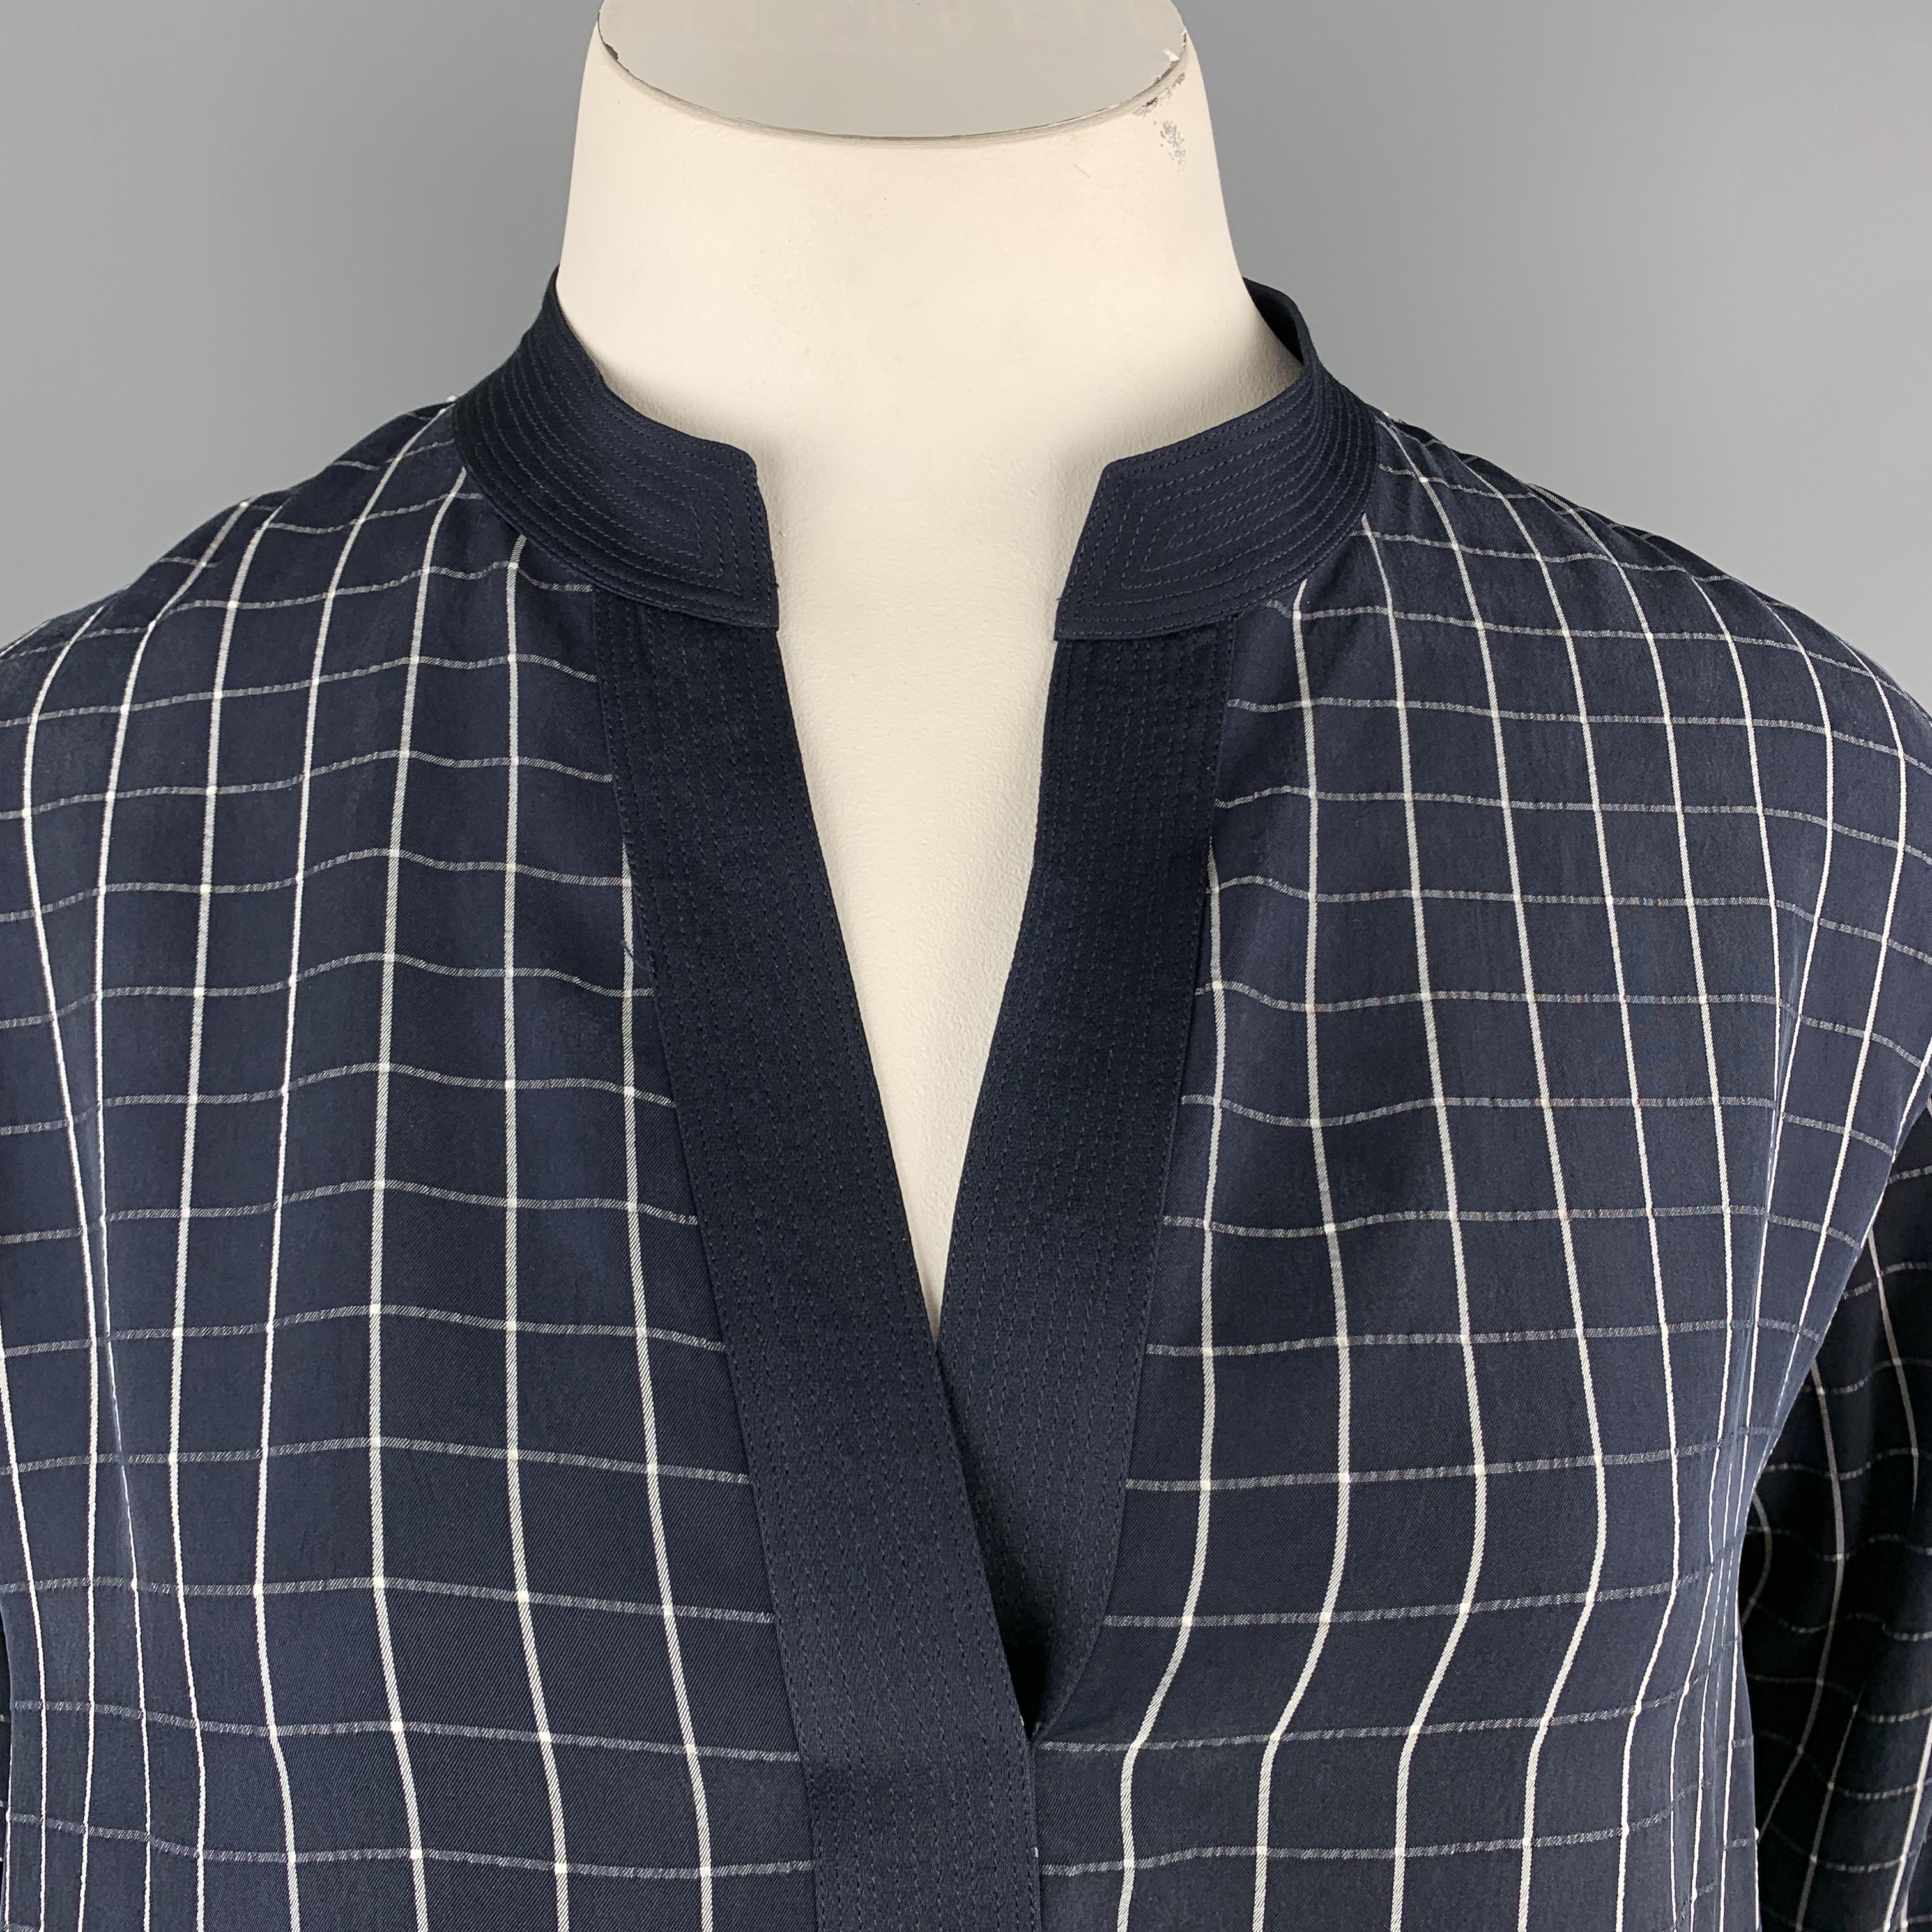 GIORGIO ARMANI blouse comes in navy and white windowpane fabric with a quilted satin trim V neck and three quarter sleeves. Made in Italy.

Excellent Pre-Owned Condition.
Marked: IT 48

Measurements:

Shoulder: 18 in.
Bust: 42 in.
Sleeve: 16.5